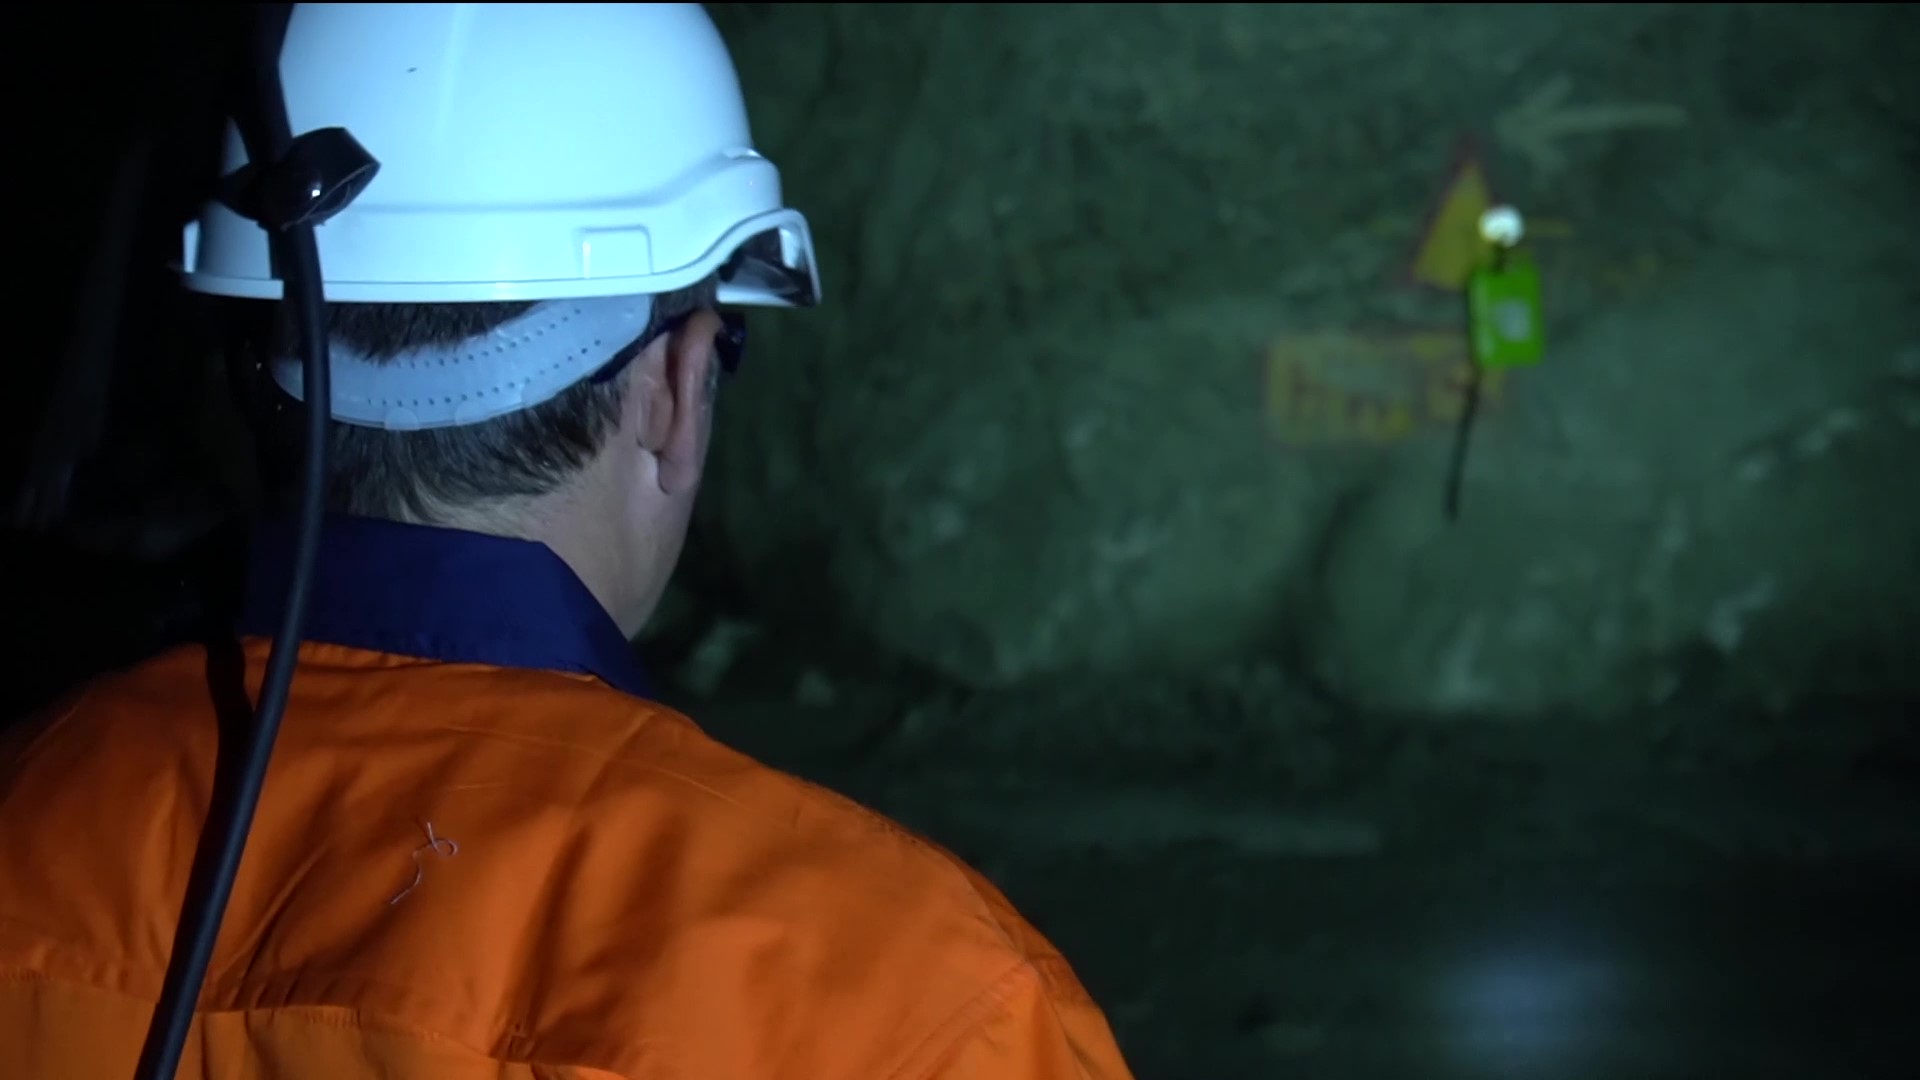 GeoMoby technology allows greater underground communication